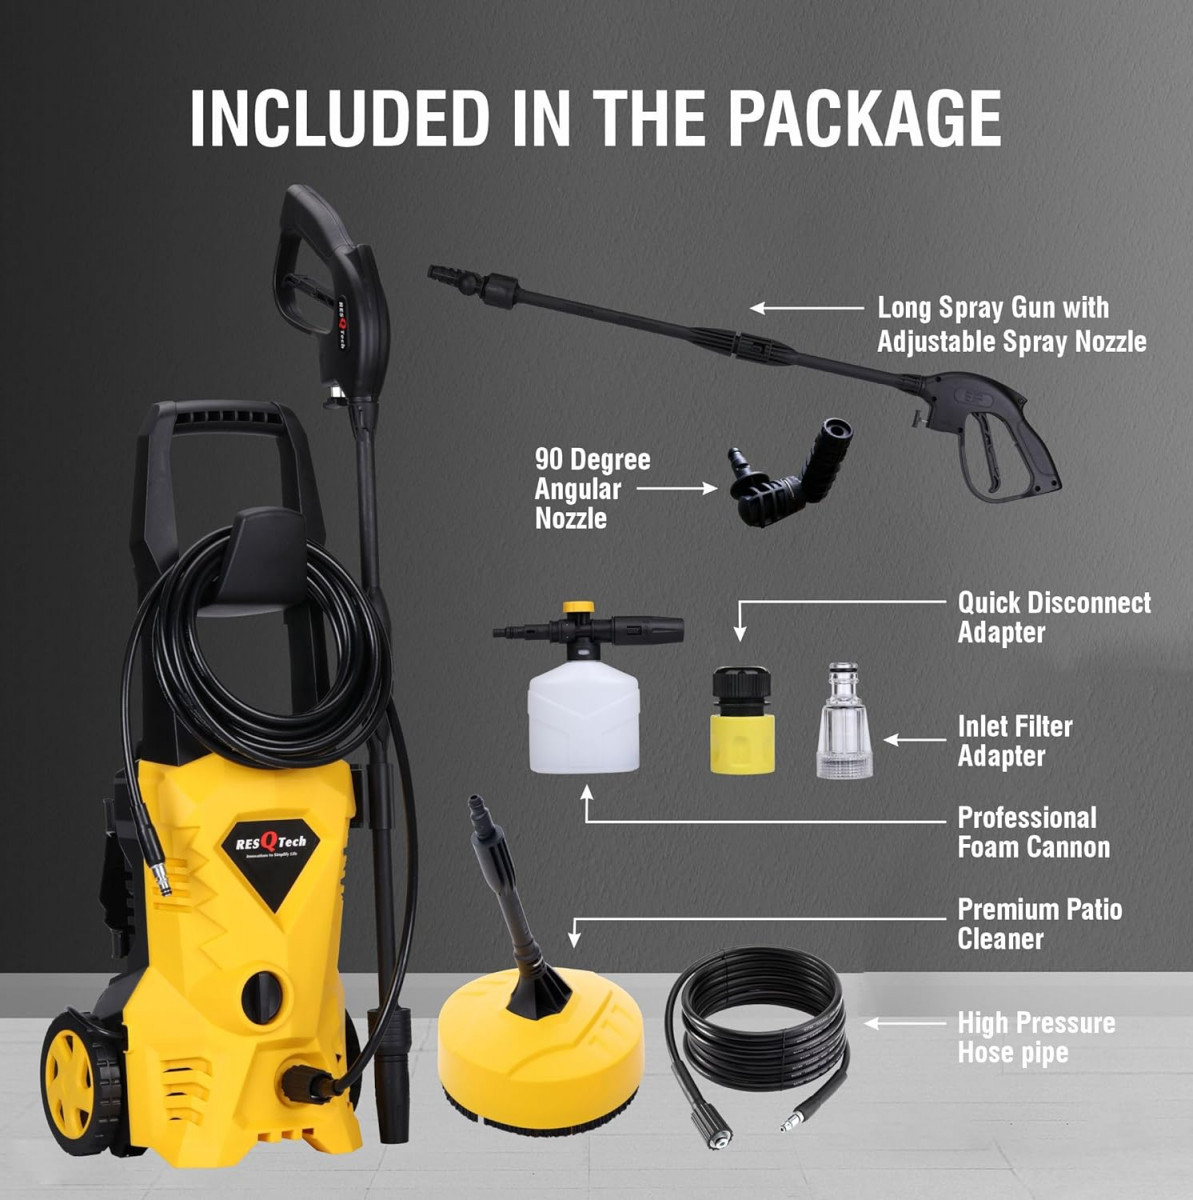 ResQTech PW-101 Advance 1700 Watt 135 Bar High Pressure Washer for Car Bike and Home - 2 Year Warranty - Patio Cleaner - Foam Cannon - 90 Degree Nozzle - 6m Hose Pipe 6 m Power Cord - Copper Winding -  Premium Edition 